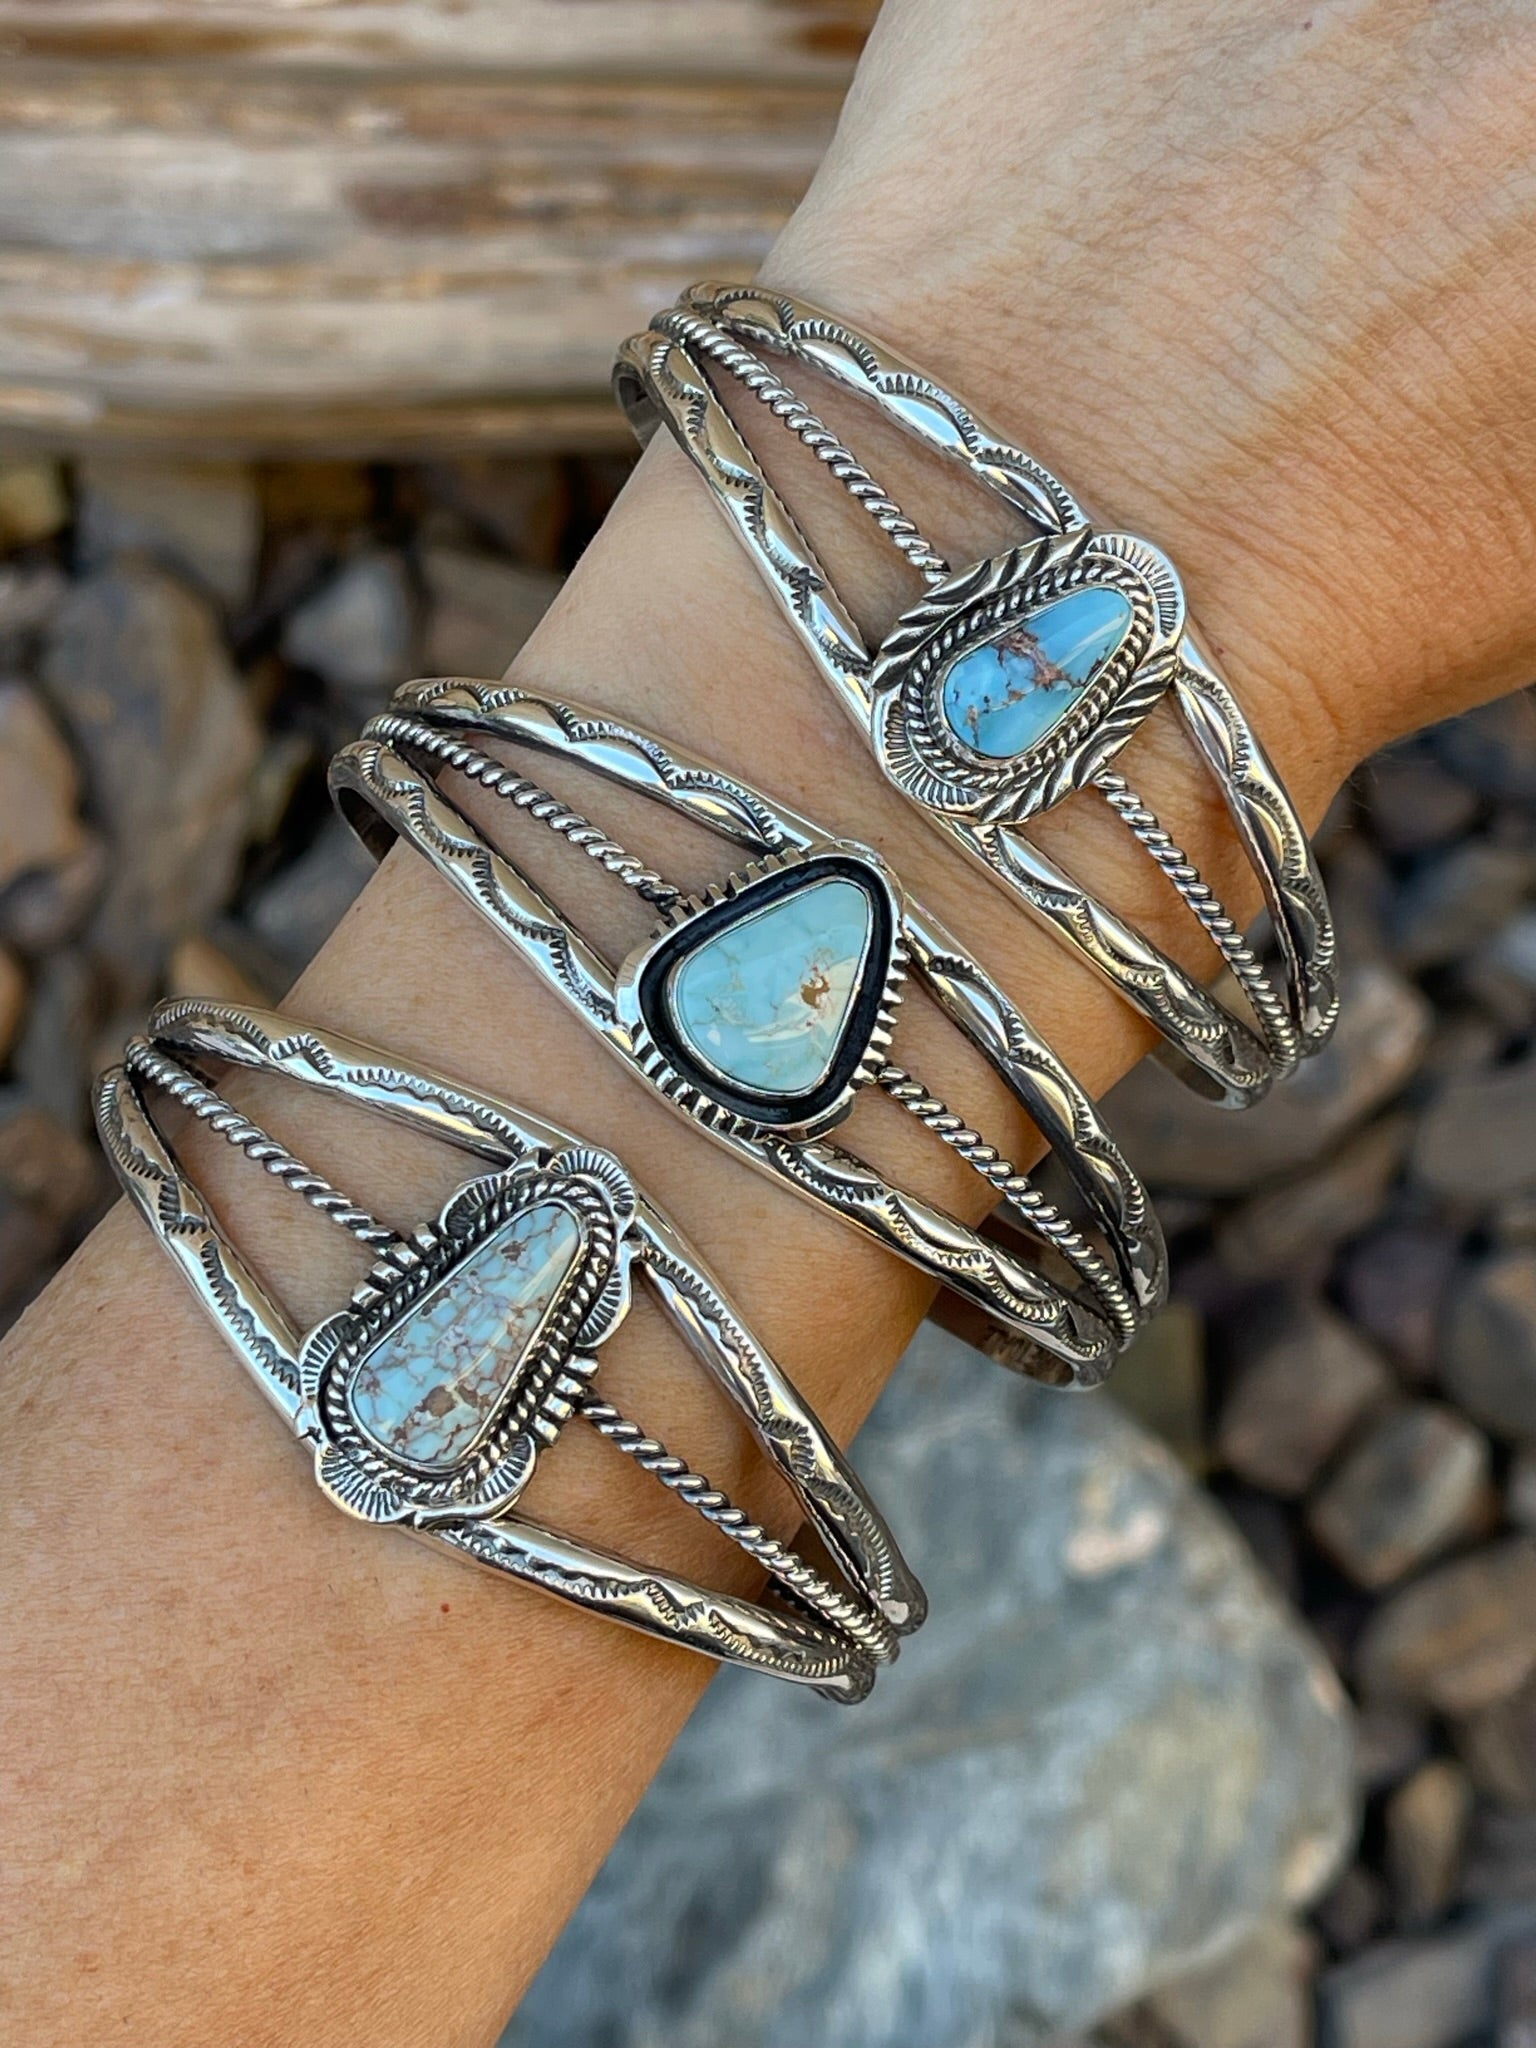 Signature Handmade Sterling Silver Dry Creek Turquoise Bracelet with Stamp Detail